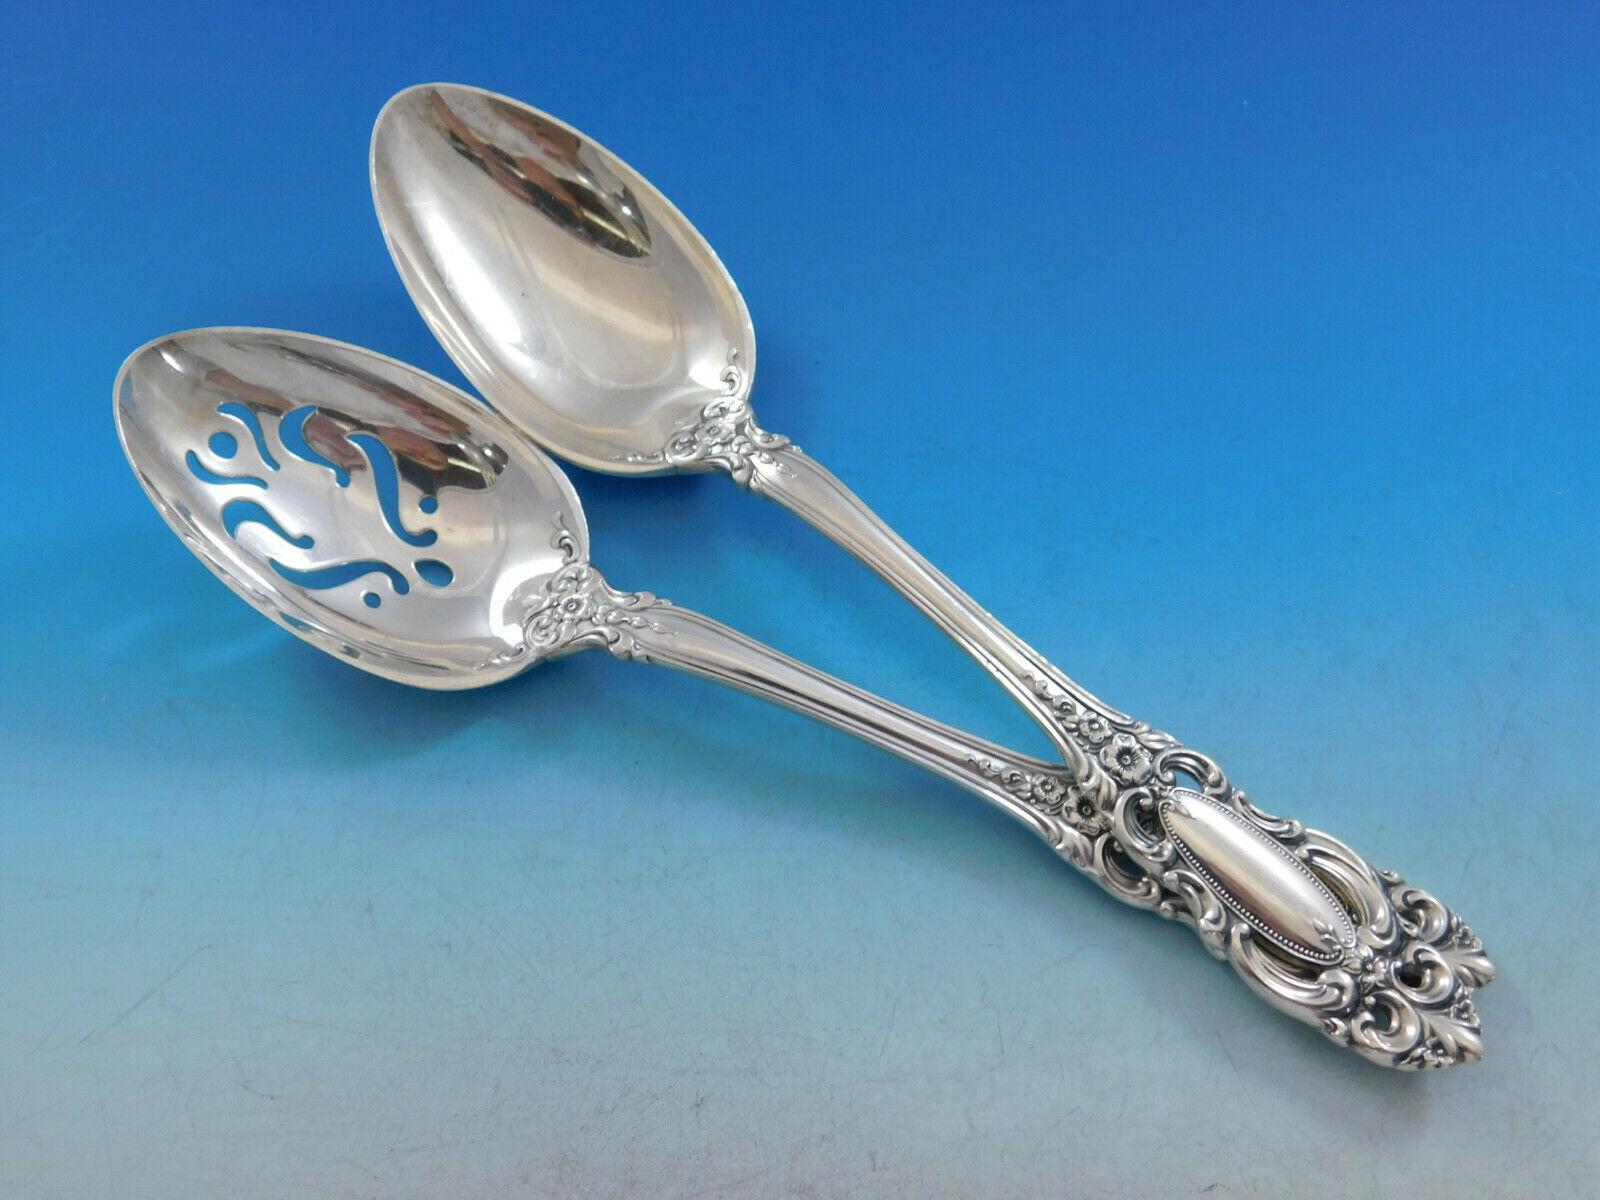 Grand Duchess by Towle Sterling Silver Sugar Spoon 6 1/4" New 